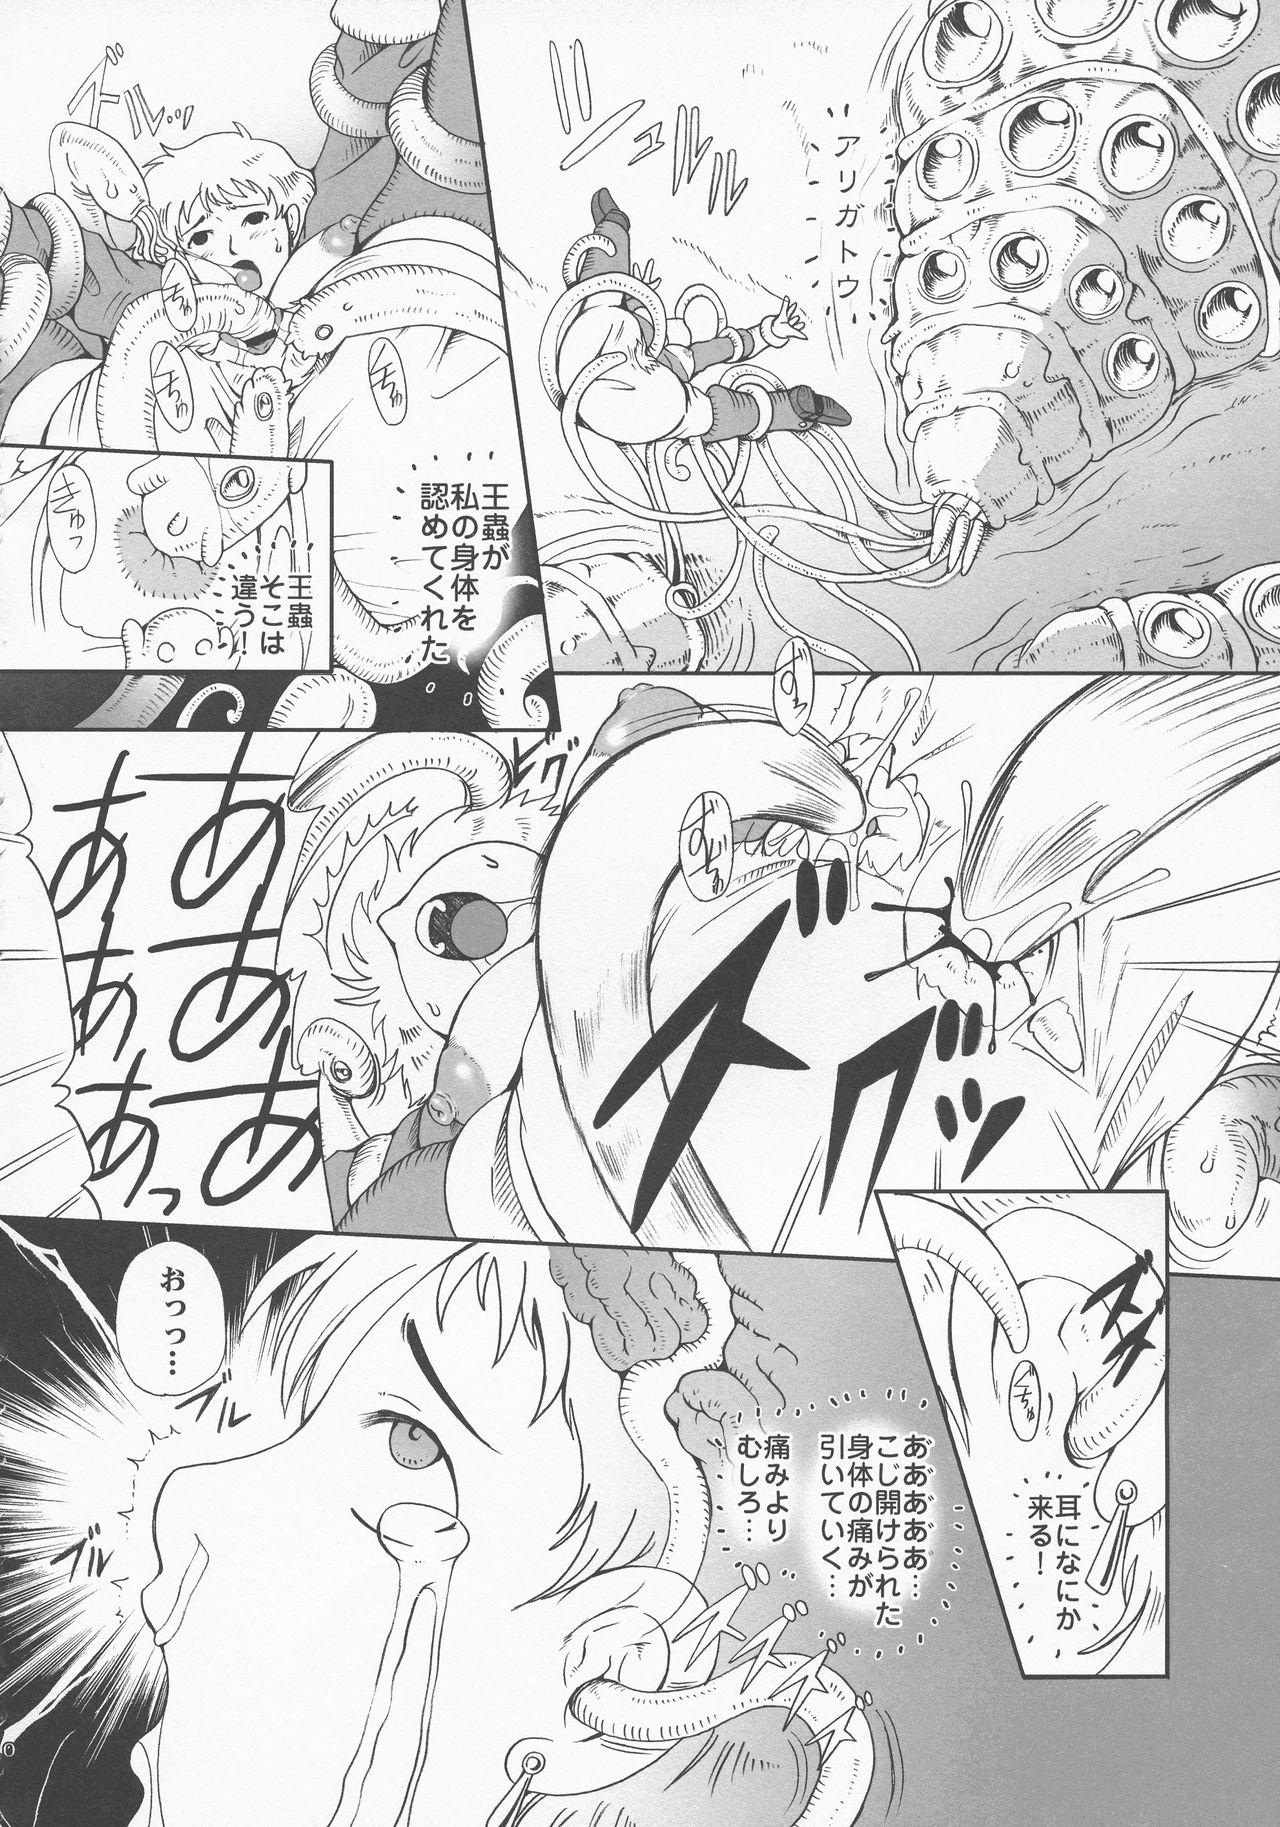 Strange Kusari Hime - Nausicaa of the valley of the wind Woman Fucking - Page 10